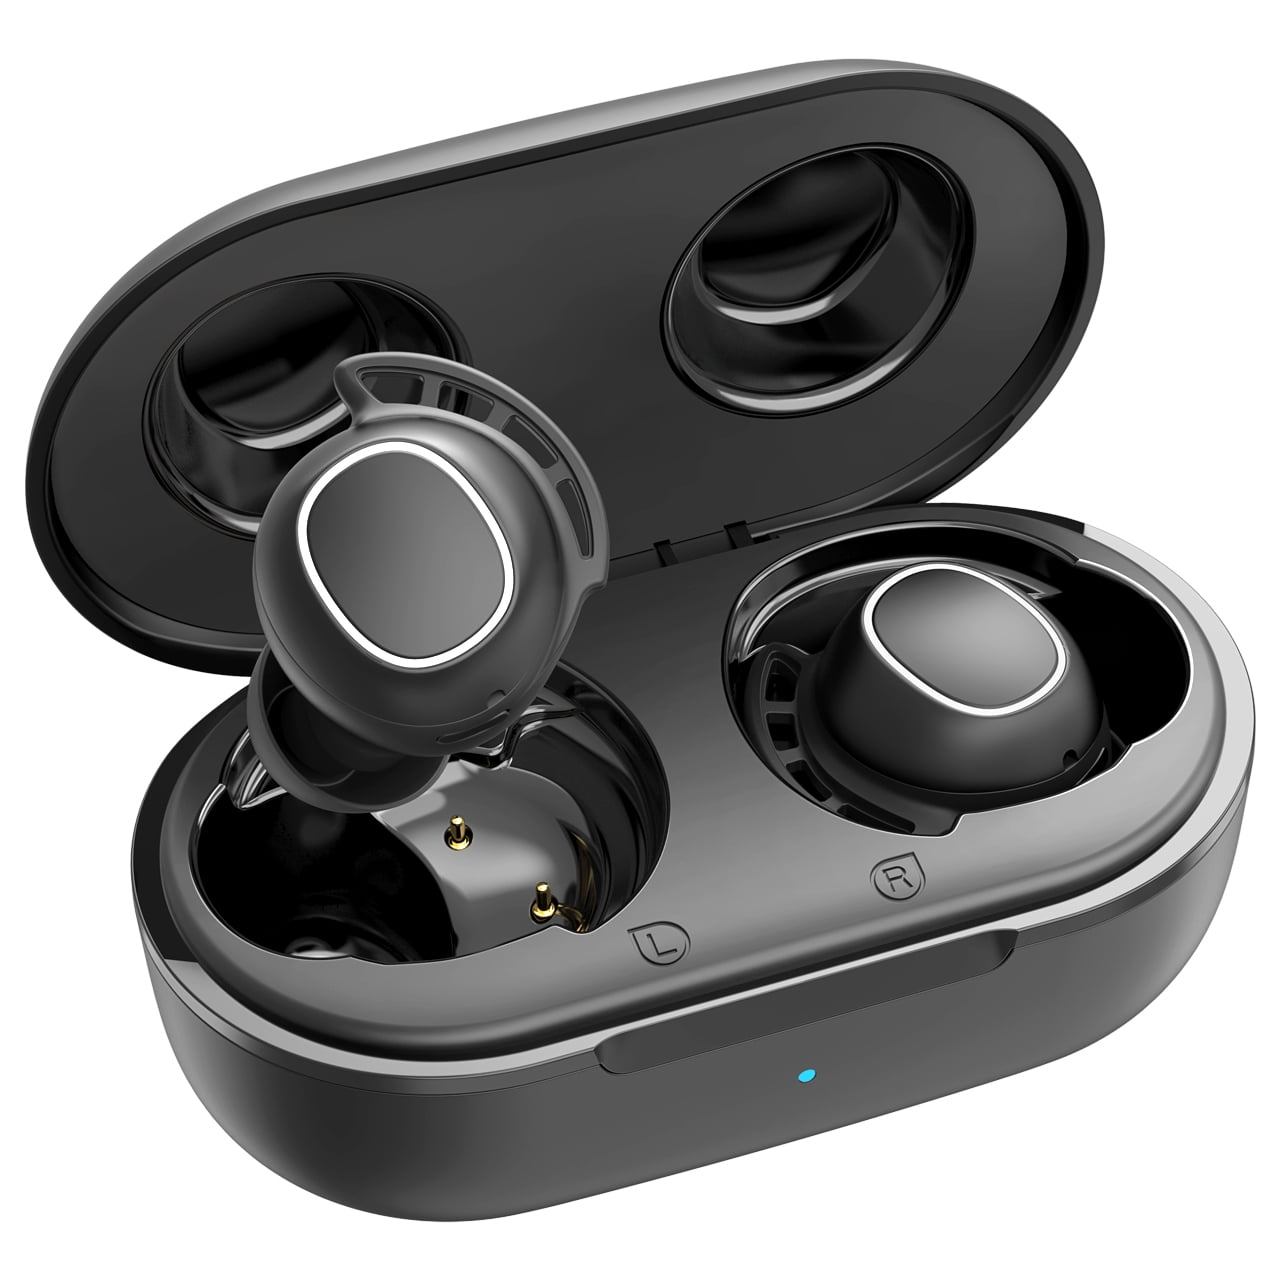 fuga Método Santuario Mpow Wireless Earbuds ANC, Bluetooth 5.2 Active Noise Canceling Headphones  w/35H Playtime, M30 in-Ear Bluetooth Earbuds, Deep Bass Sports Headphones,  IPX8 Waterproof Bluetooth Headphones -Black - Walmart.com